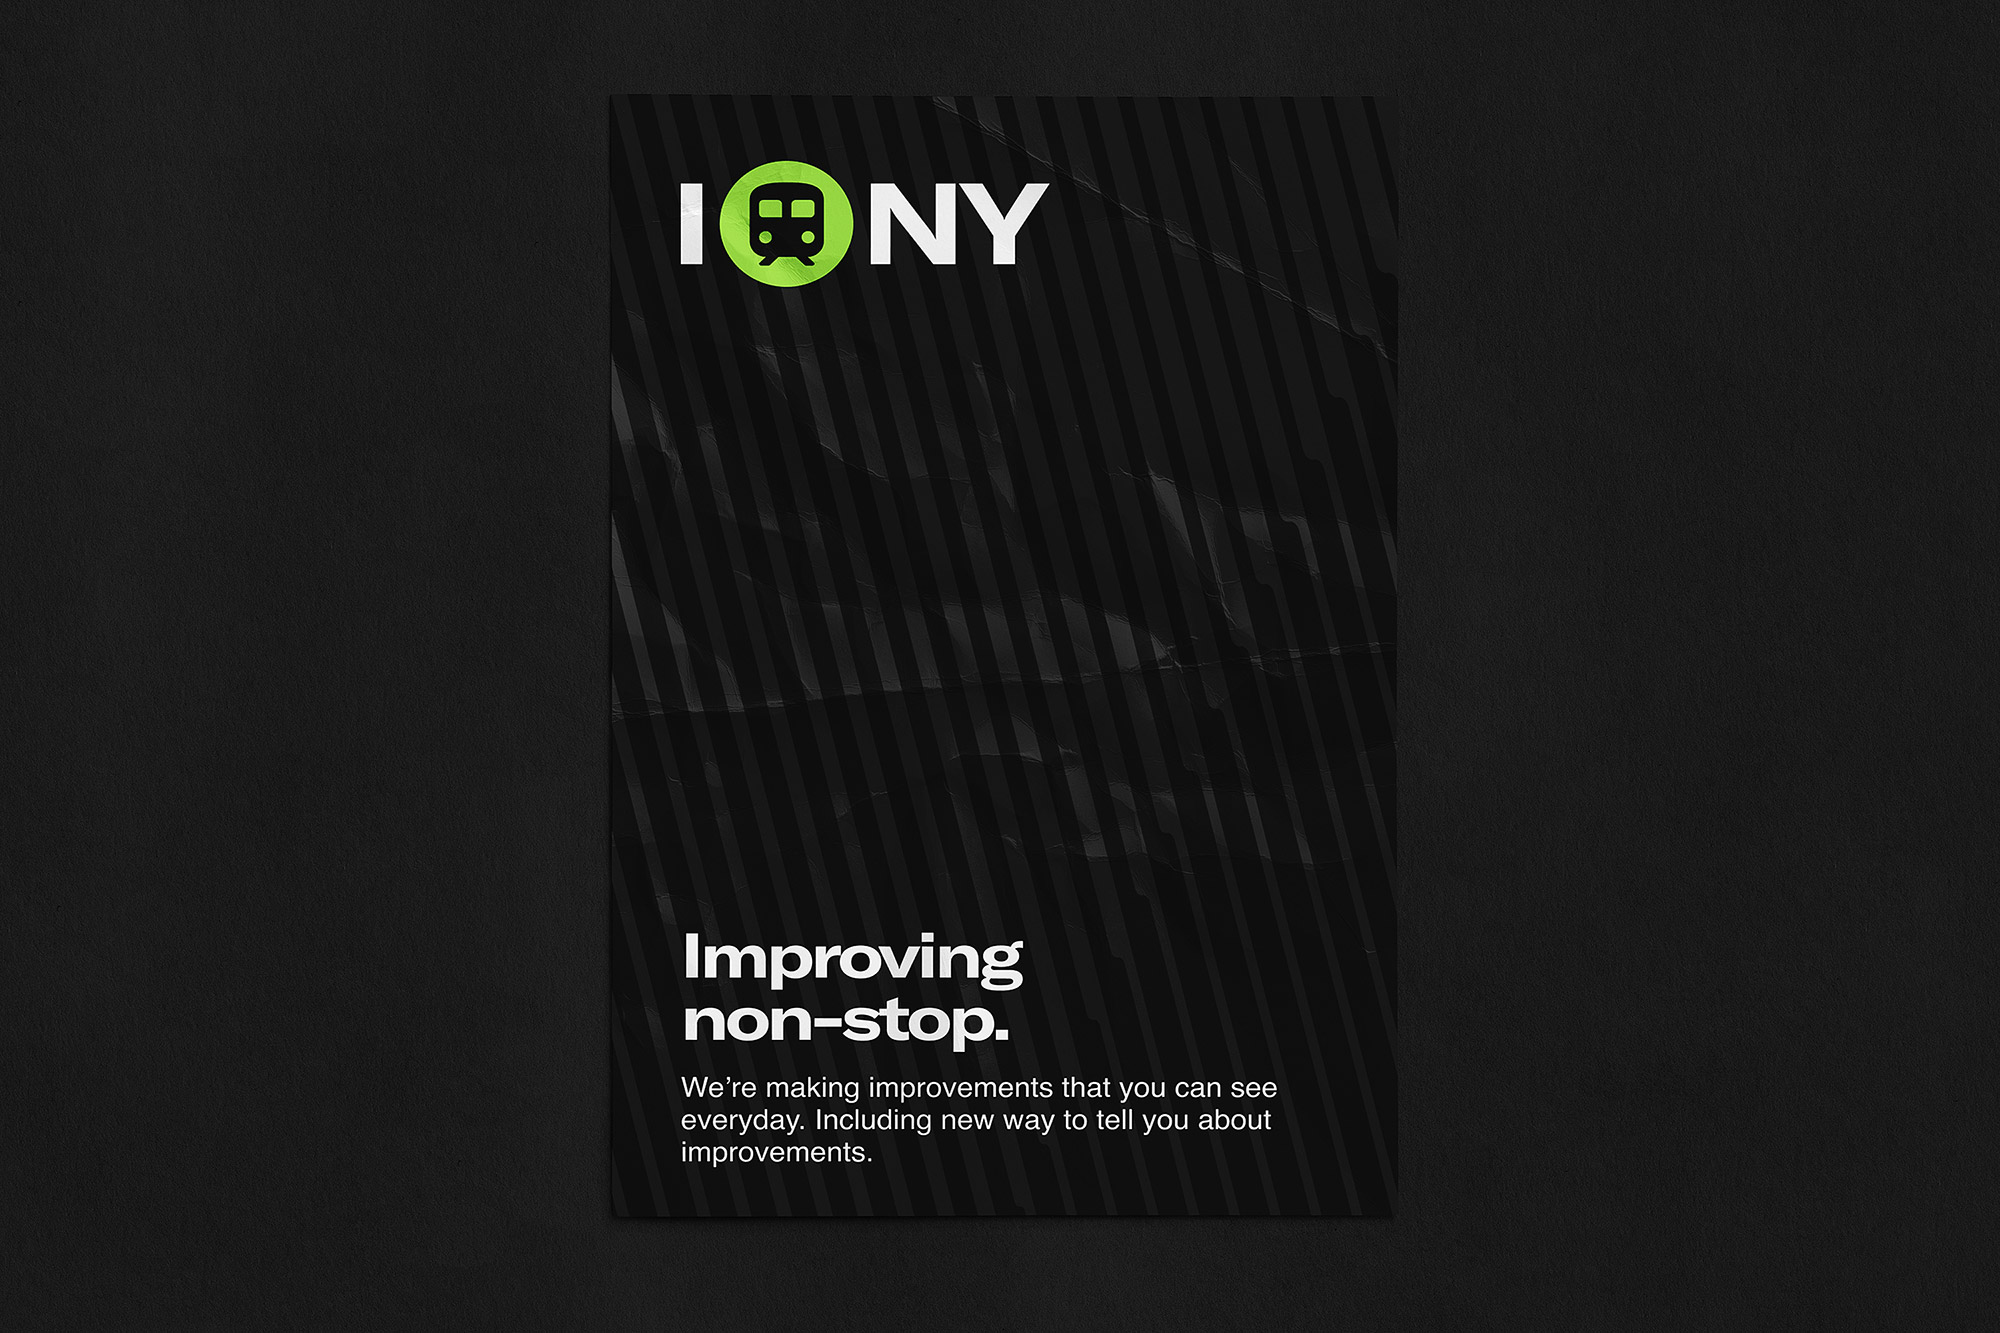 NYC Graphic Standards Manual